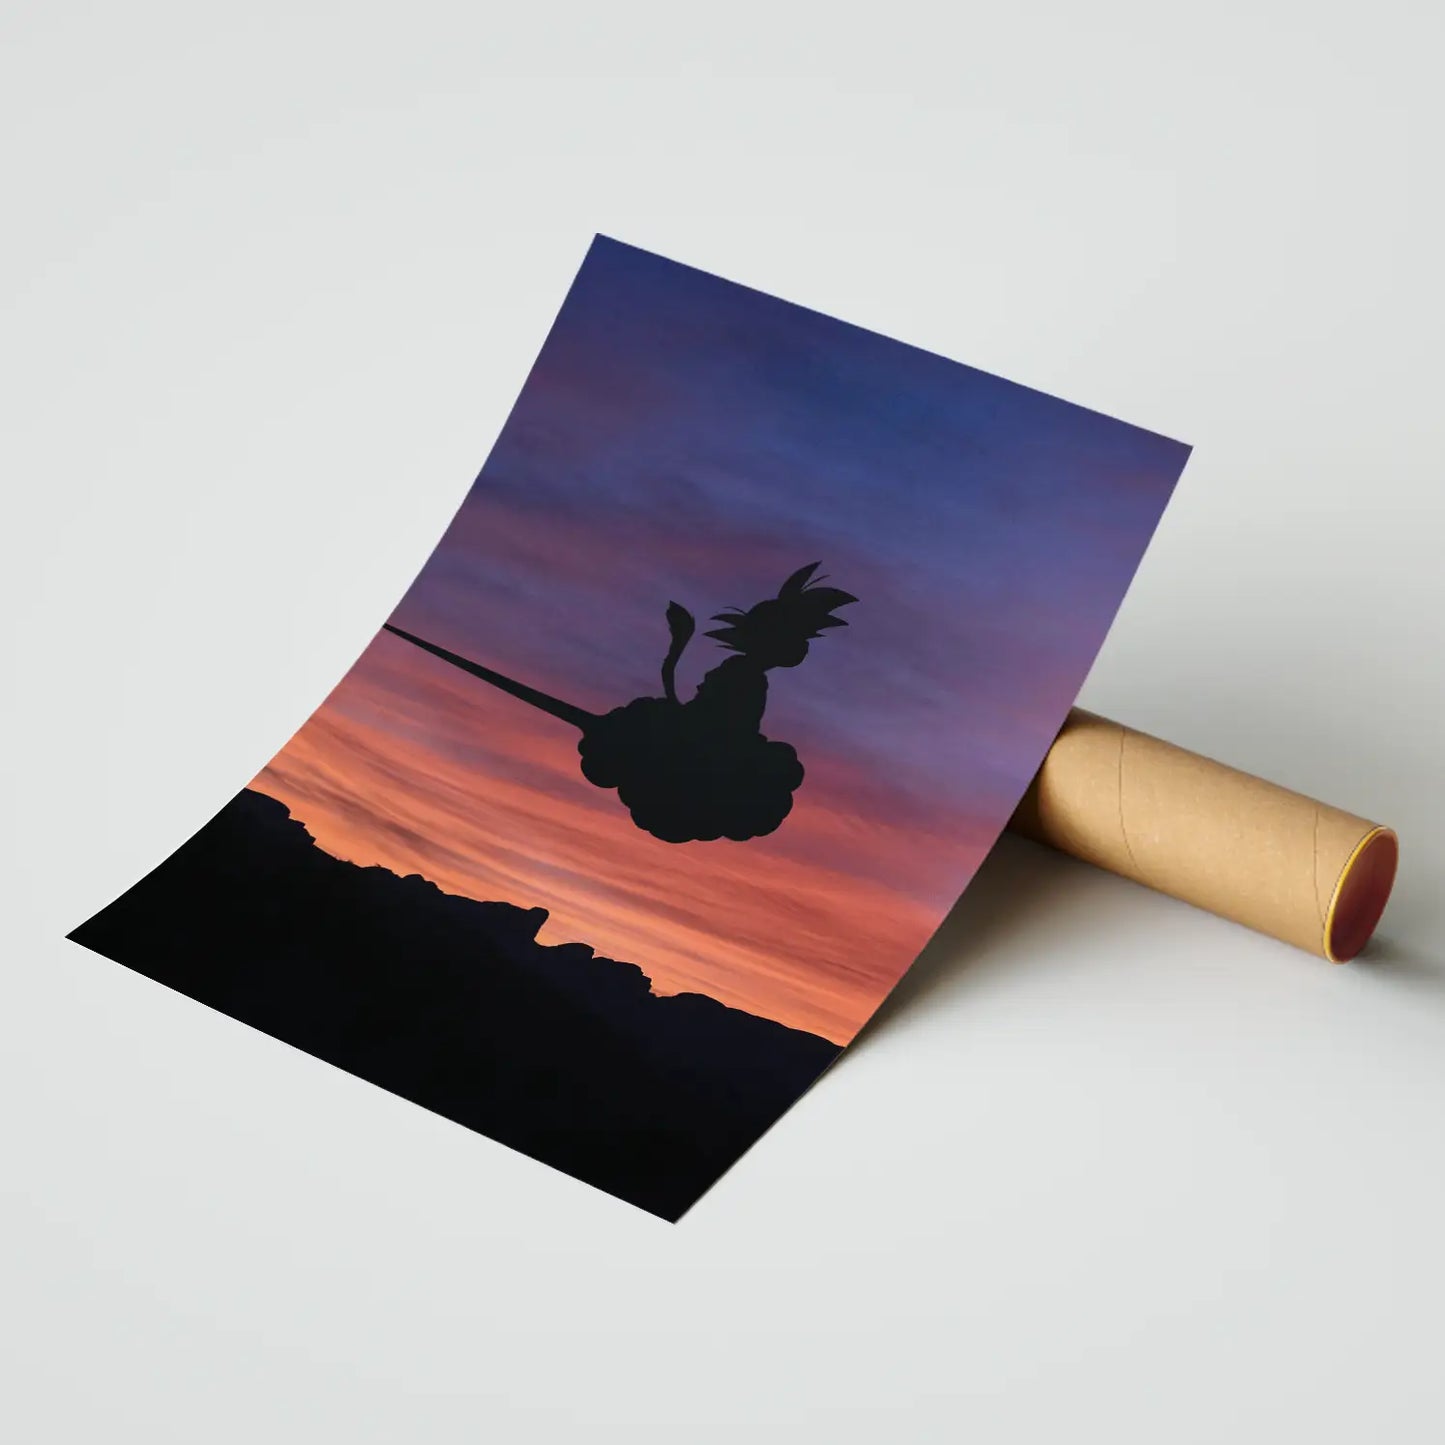 Naruto  on Black Cloud Poster | Frame | Canvas